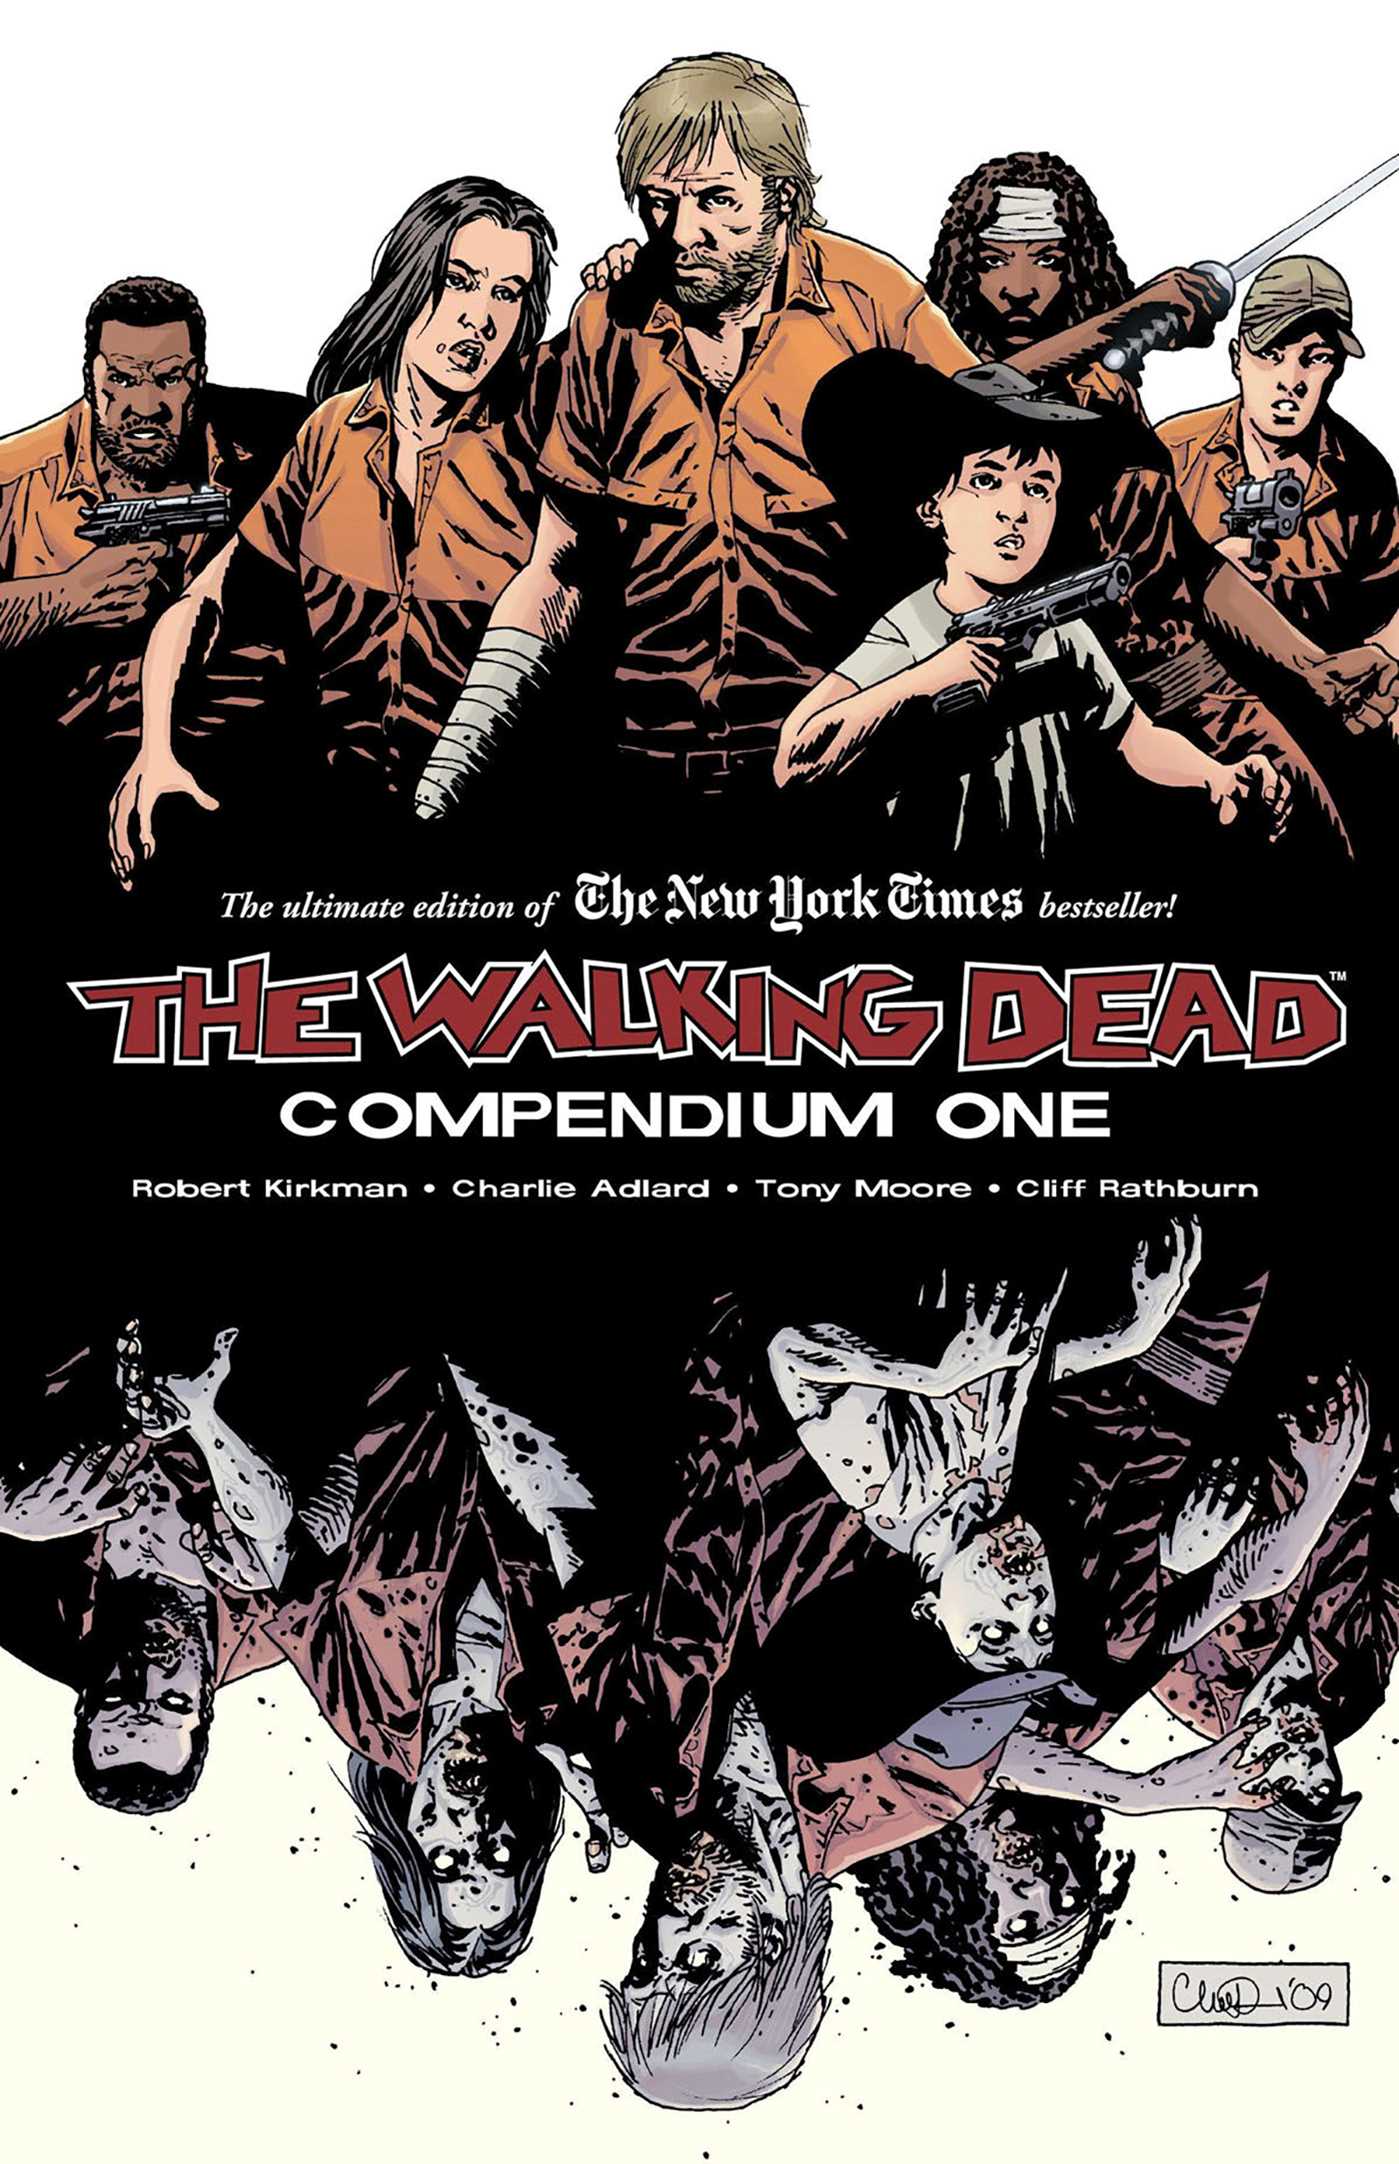 The Walking Dead Compendium (Volume 1) (Issues #1-48) (Paperback) - image 1 of 1